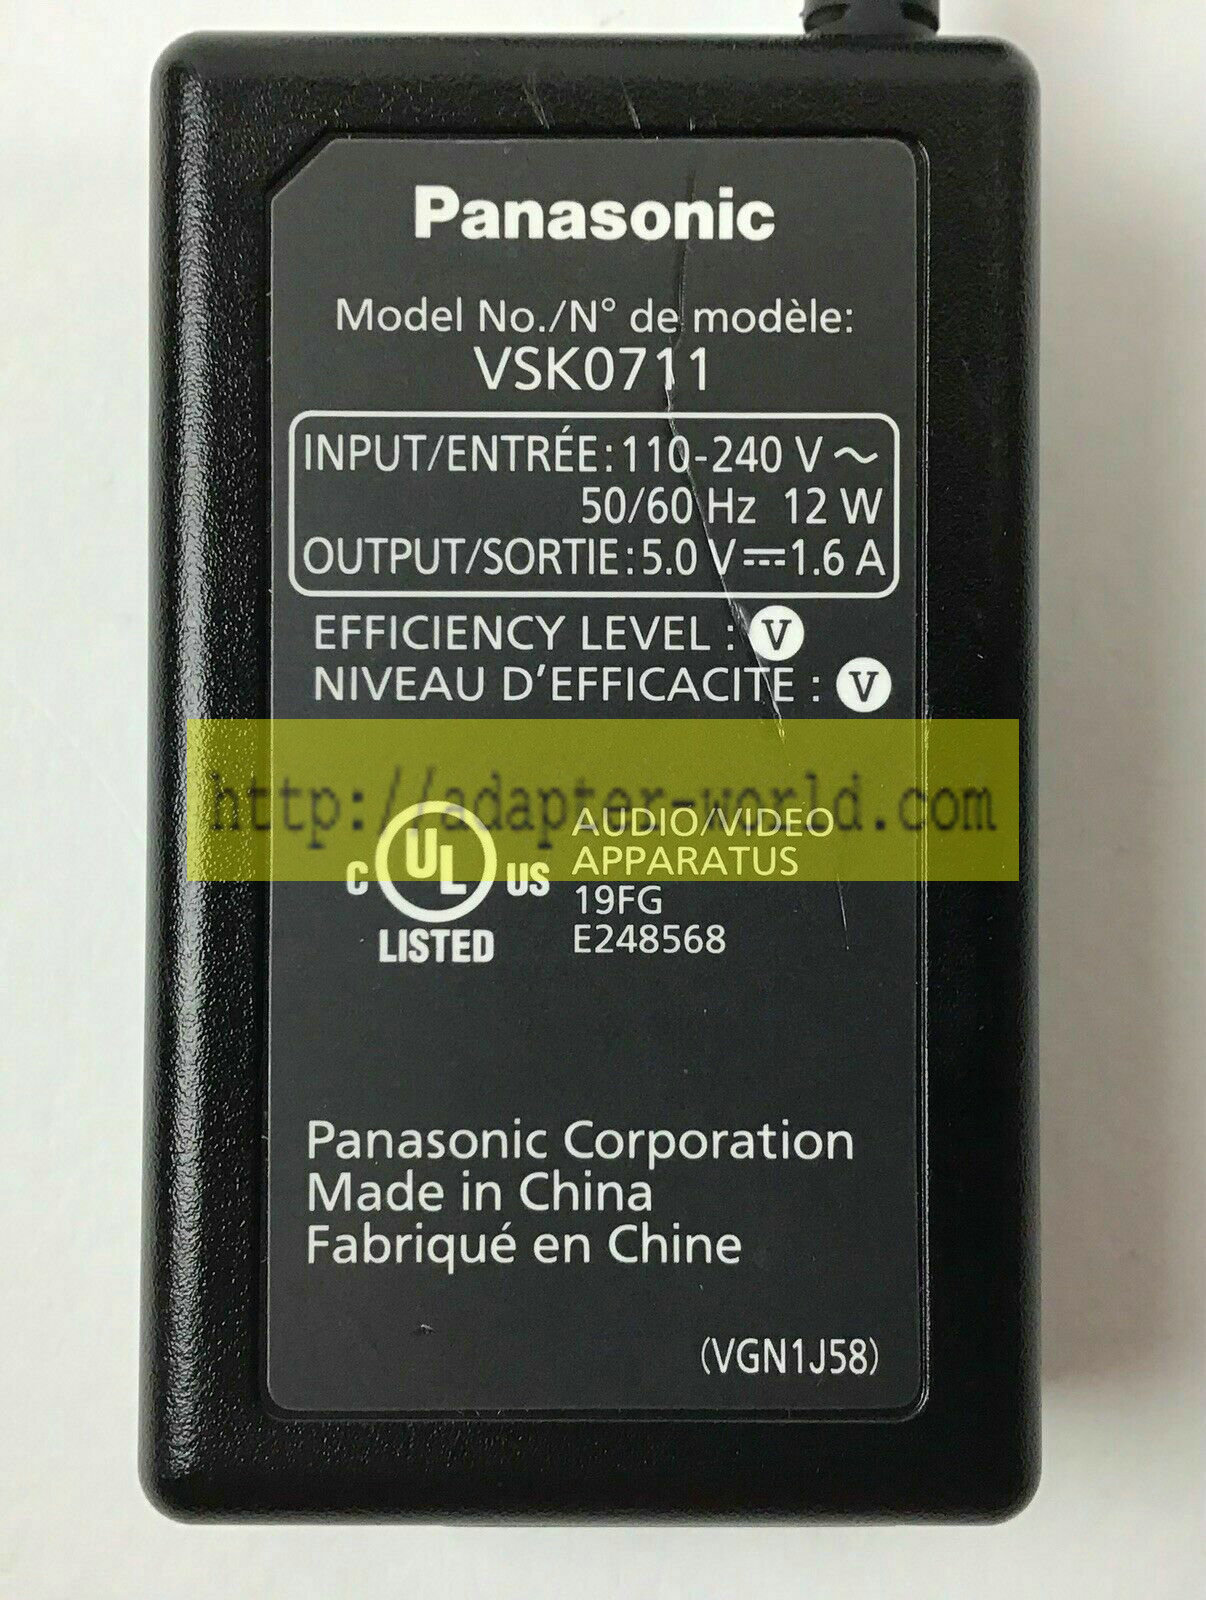 *Brand NEW* 5V 1.6A Panasonic VSK0711 Pre-owned AC DC Adapter POWER SUPPLY